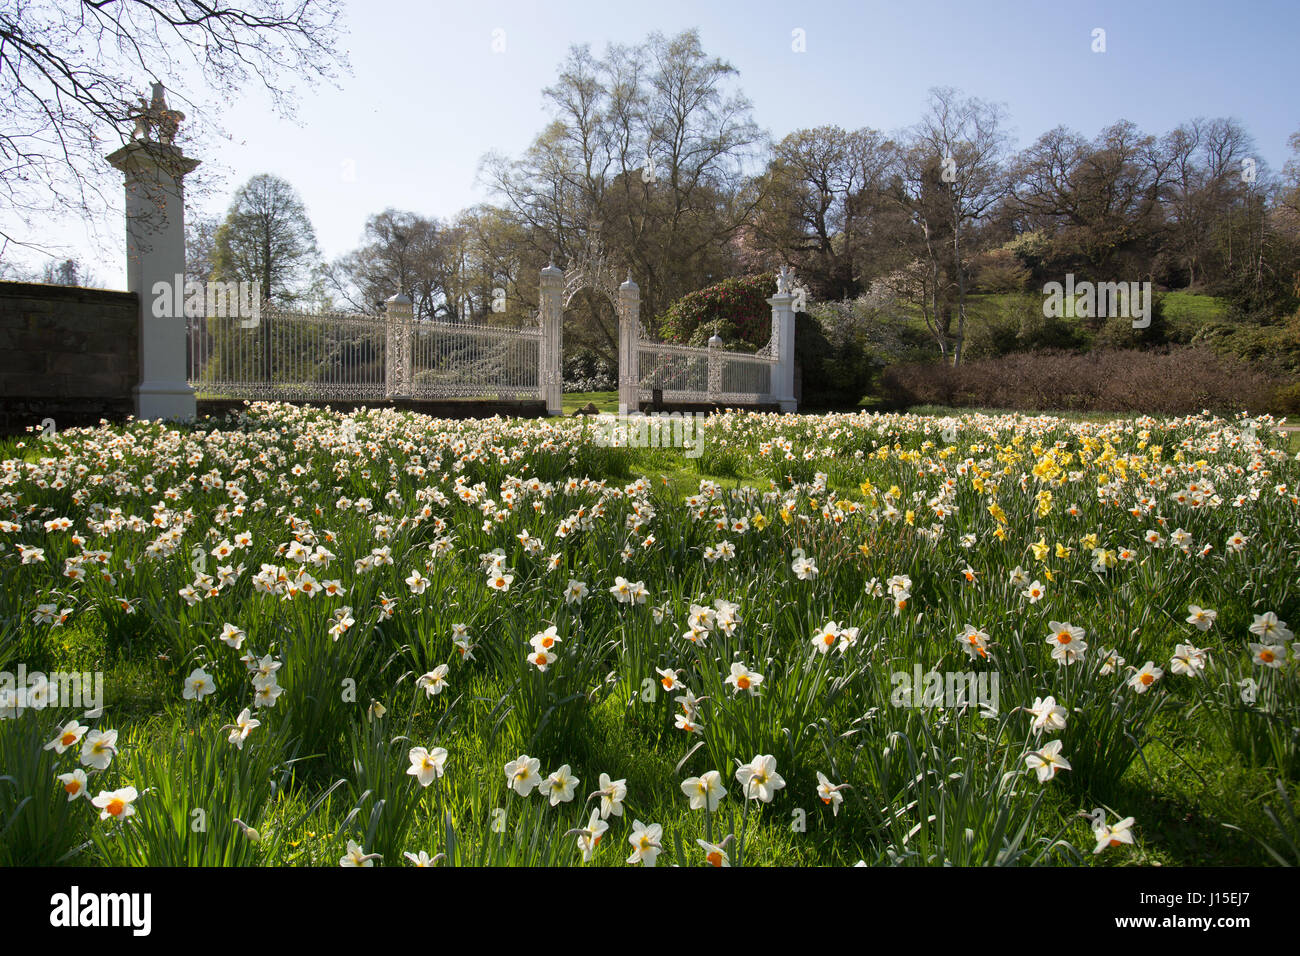 Cholmondeley Castle Gardens. Spring view of the 18th century Grade II* listed Robert Bakewell gates at Cholmondeley Castle. Stock Photo